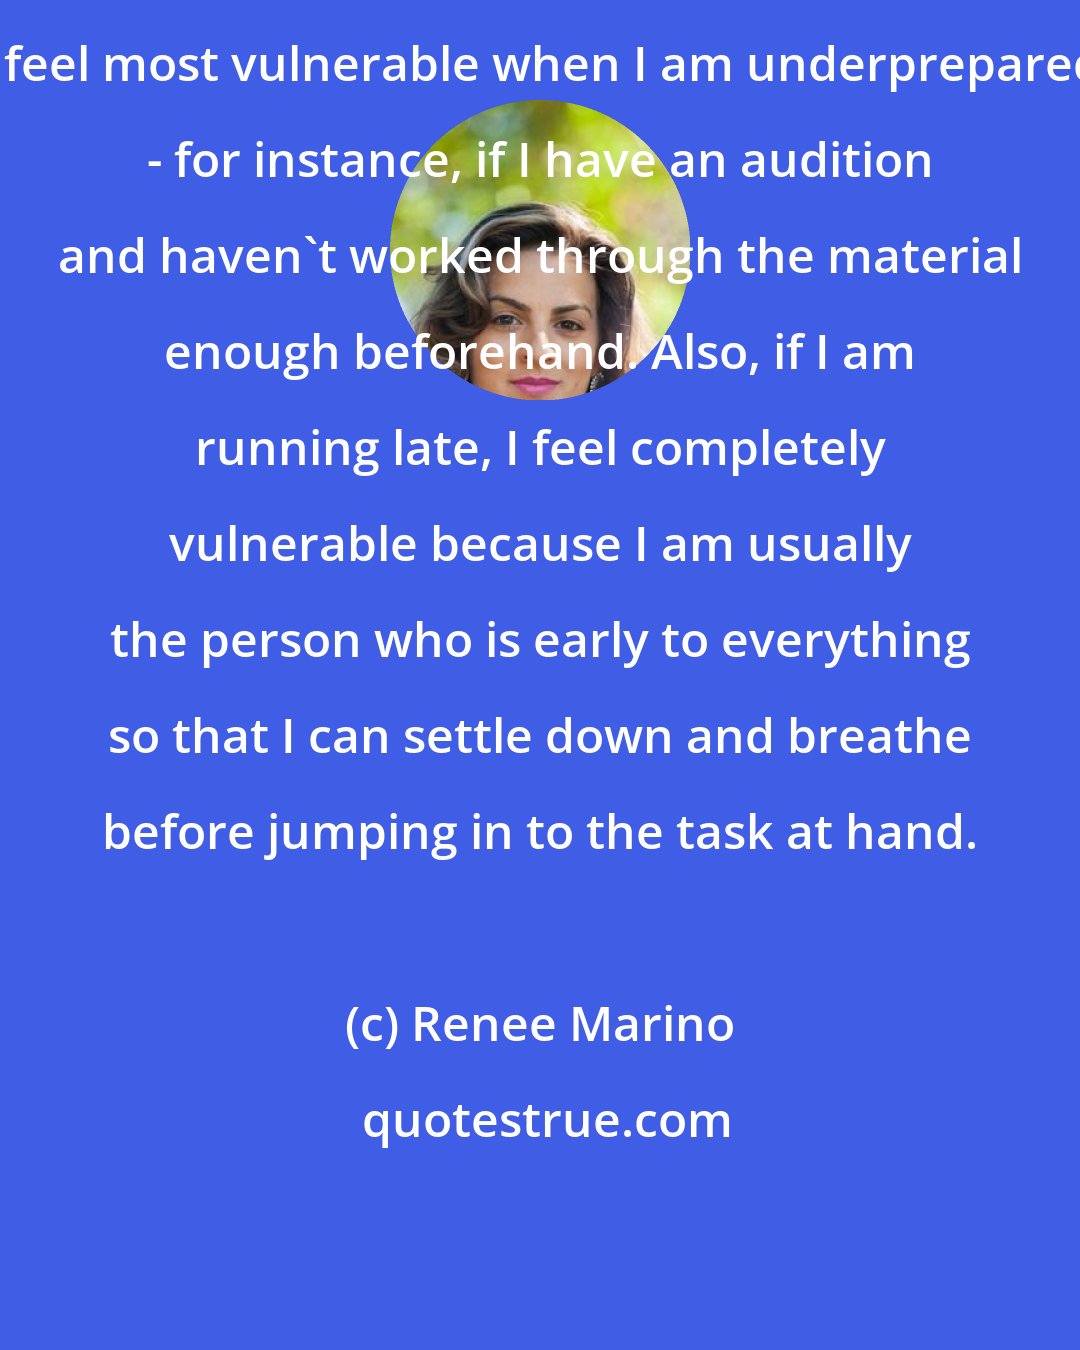 Renee Marino: I feel most vulnerable when I am underprepared - for instance, if I have an audition and haven't worked through the material enough beforehand. Also, if I am running late, I feel completely vulnerable because I am usually the person who is early to everything so that I can settle down and breathe before jumping in to the task at hand.